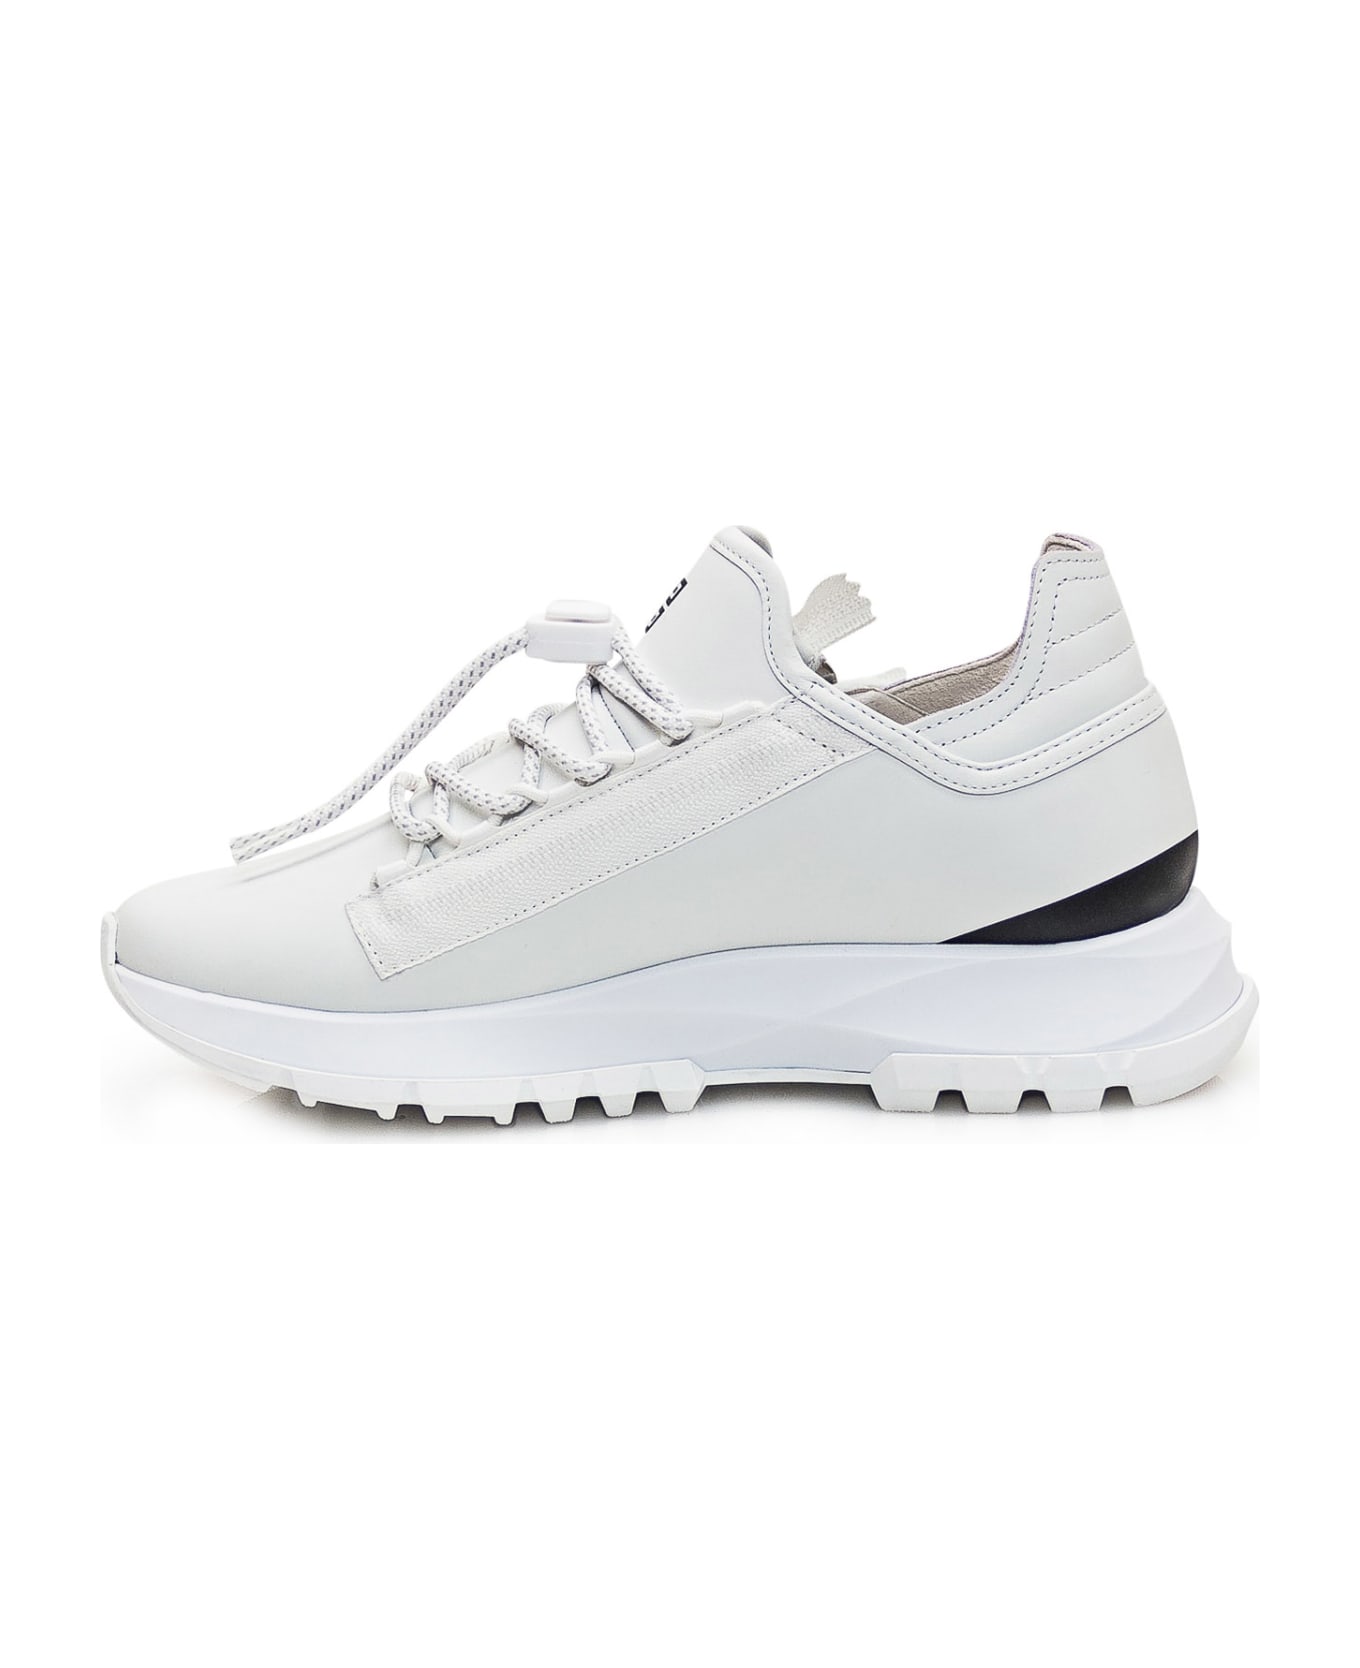 Givenchy 'spectre' Sneakers - WHITE BLACK